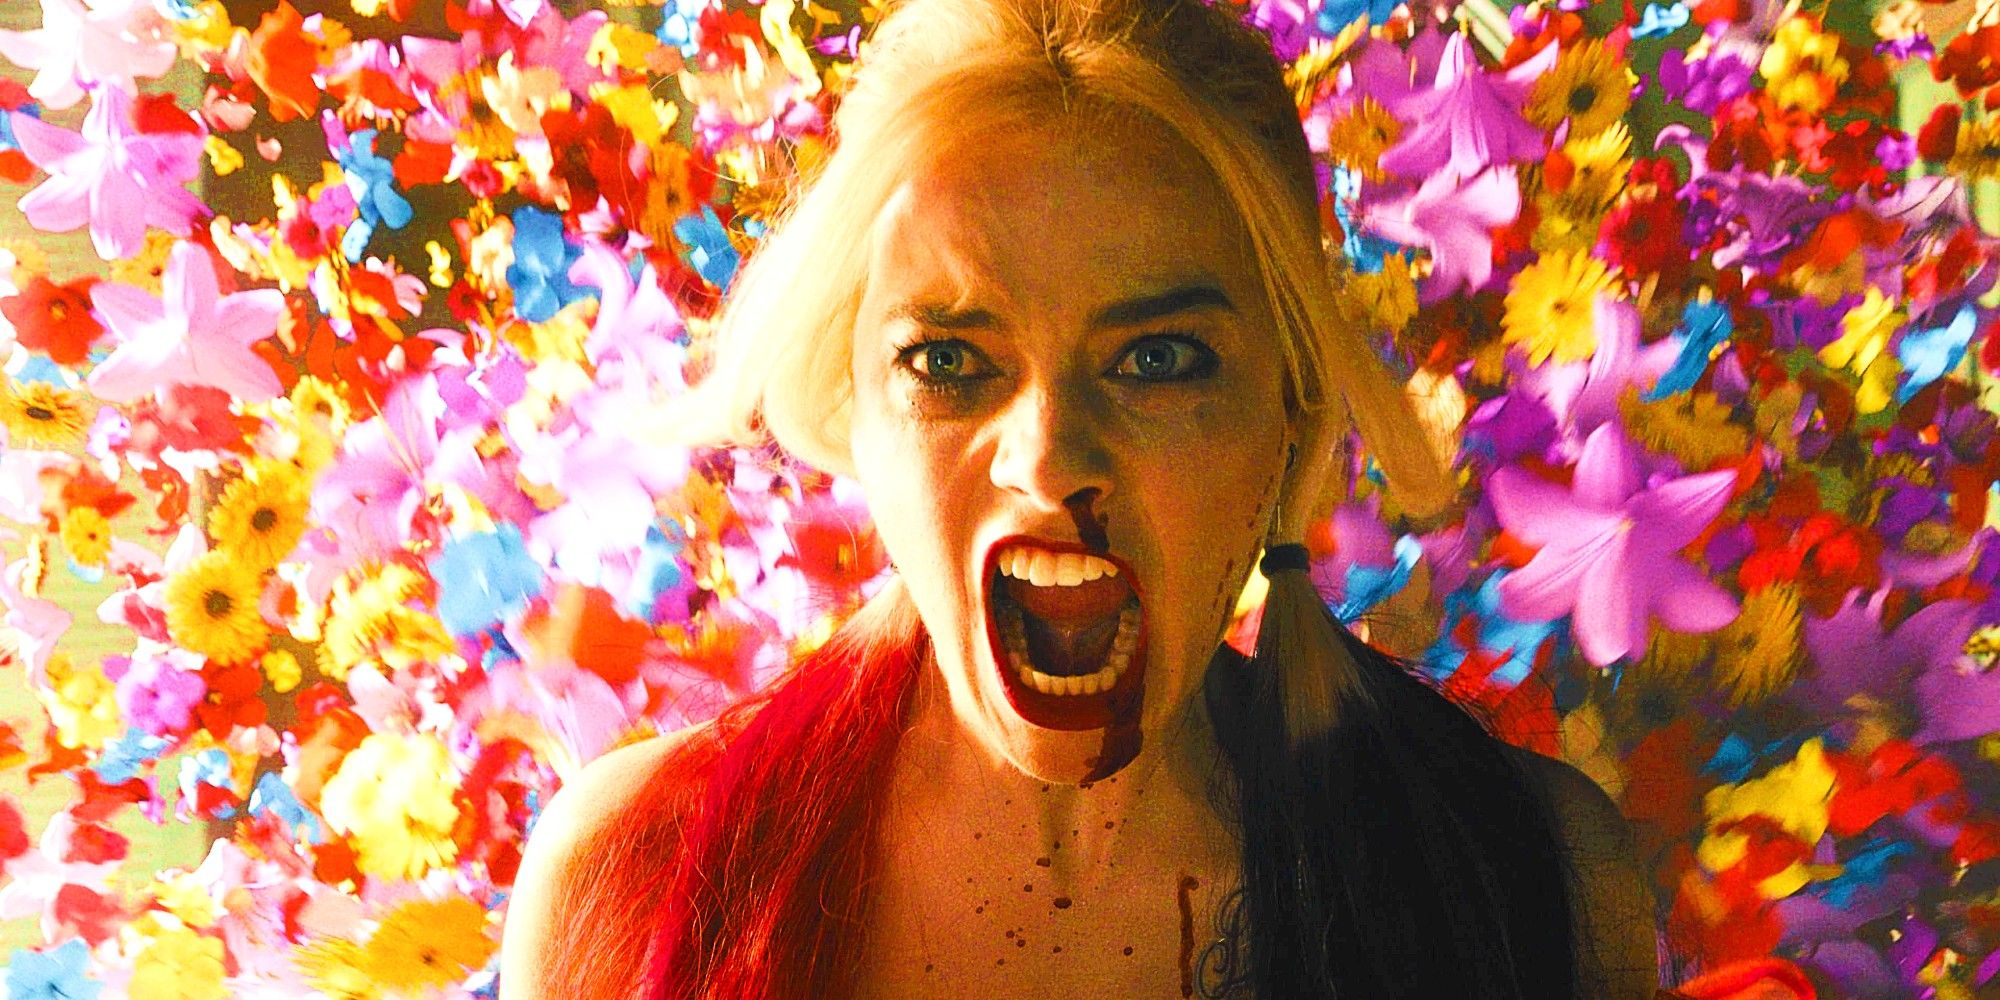 Margot Robbie As Harley Quinn Screaming In Front Of Exploding Flowers In The Suicide Squad